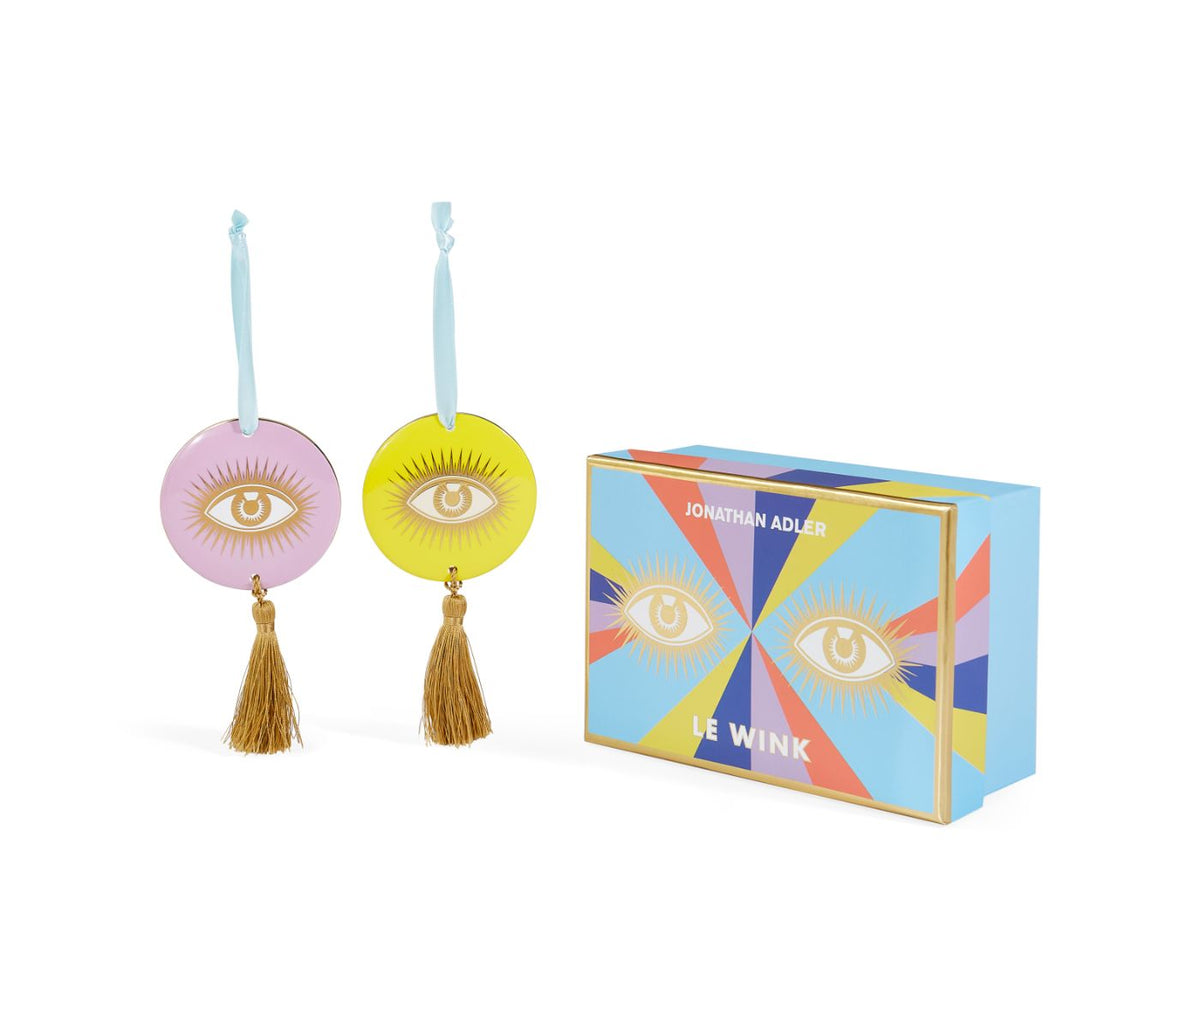 Le Wink Ornaments - Set of 2 by Jonathan Adler